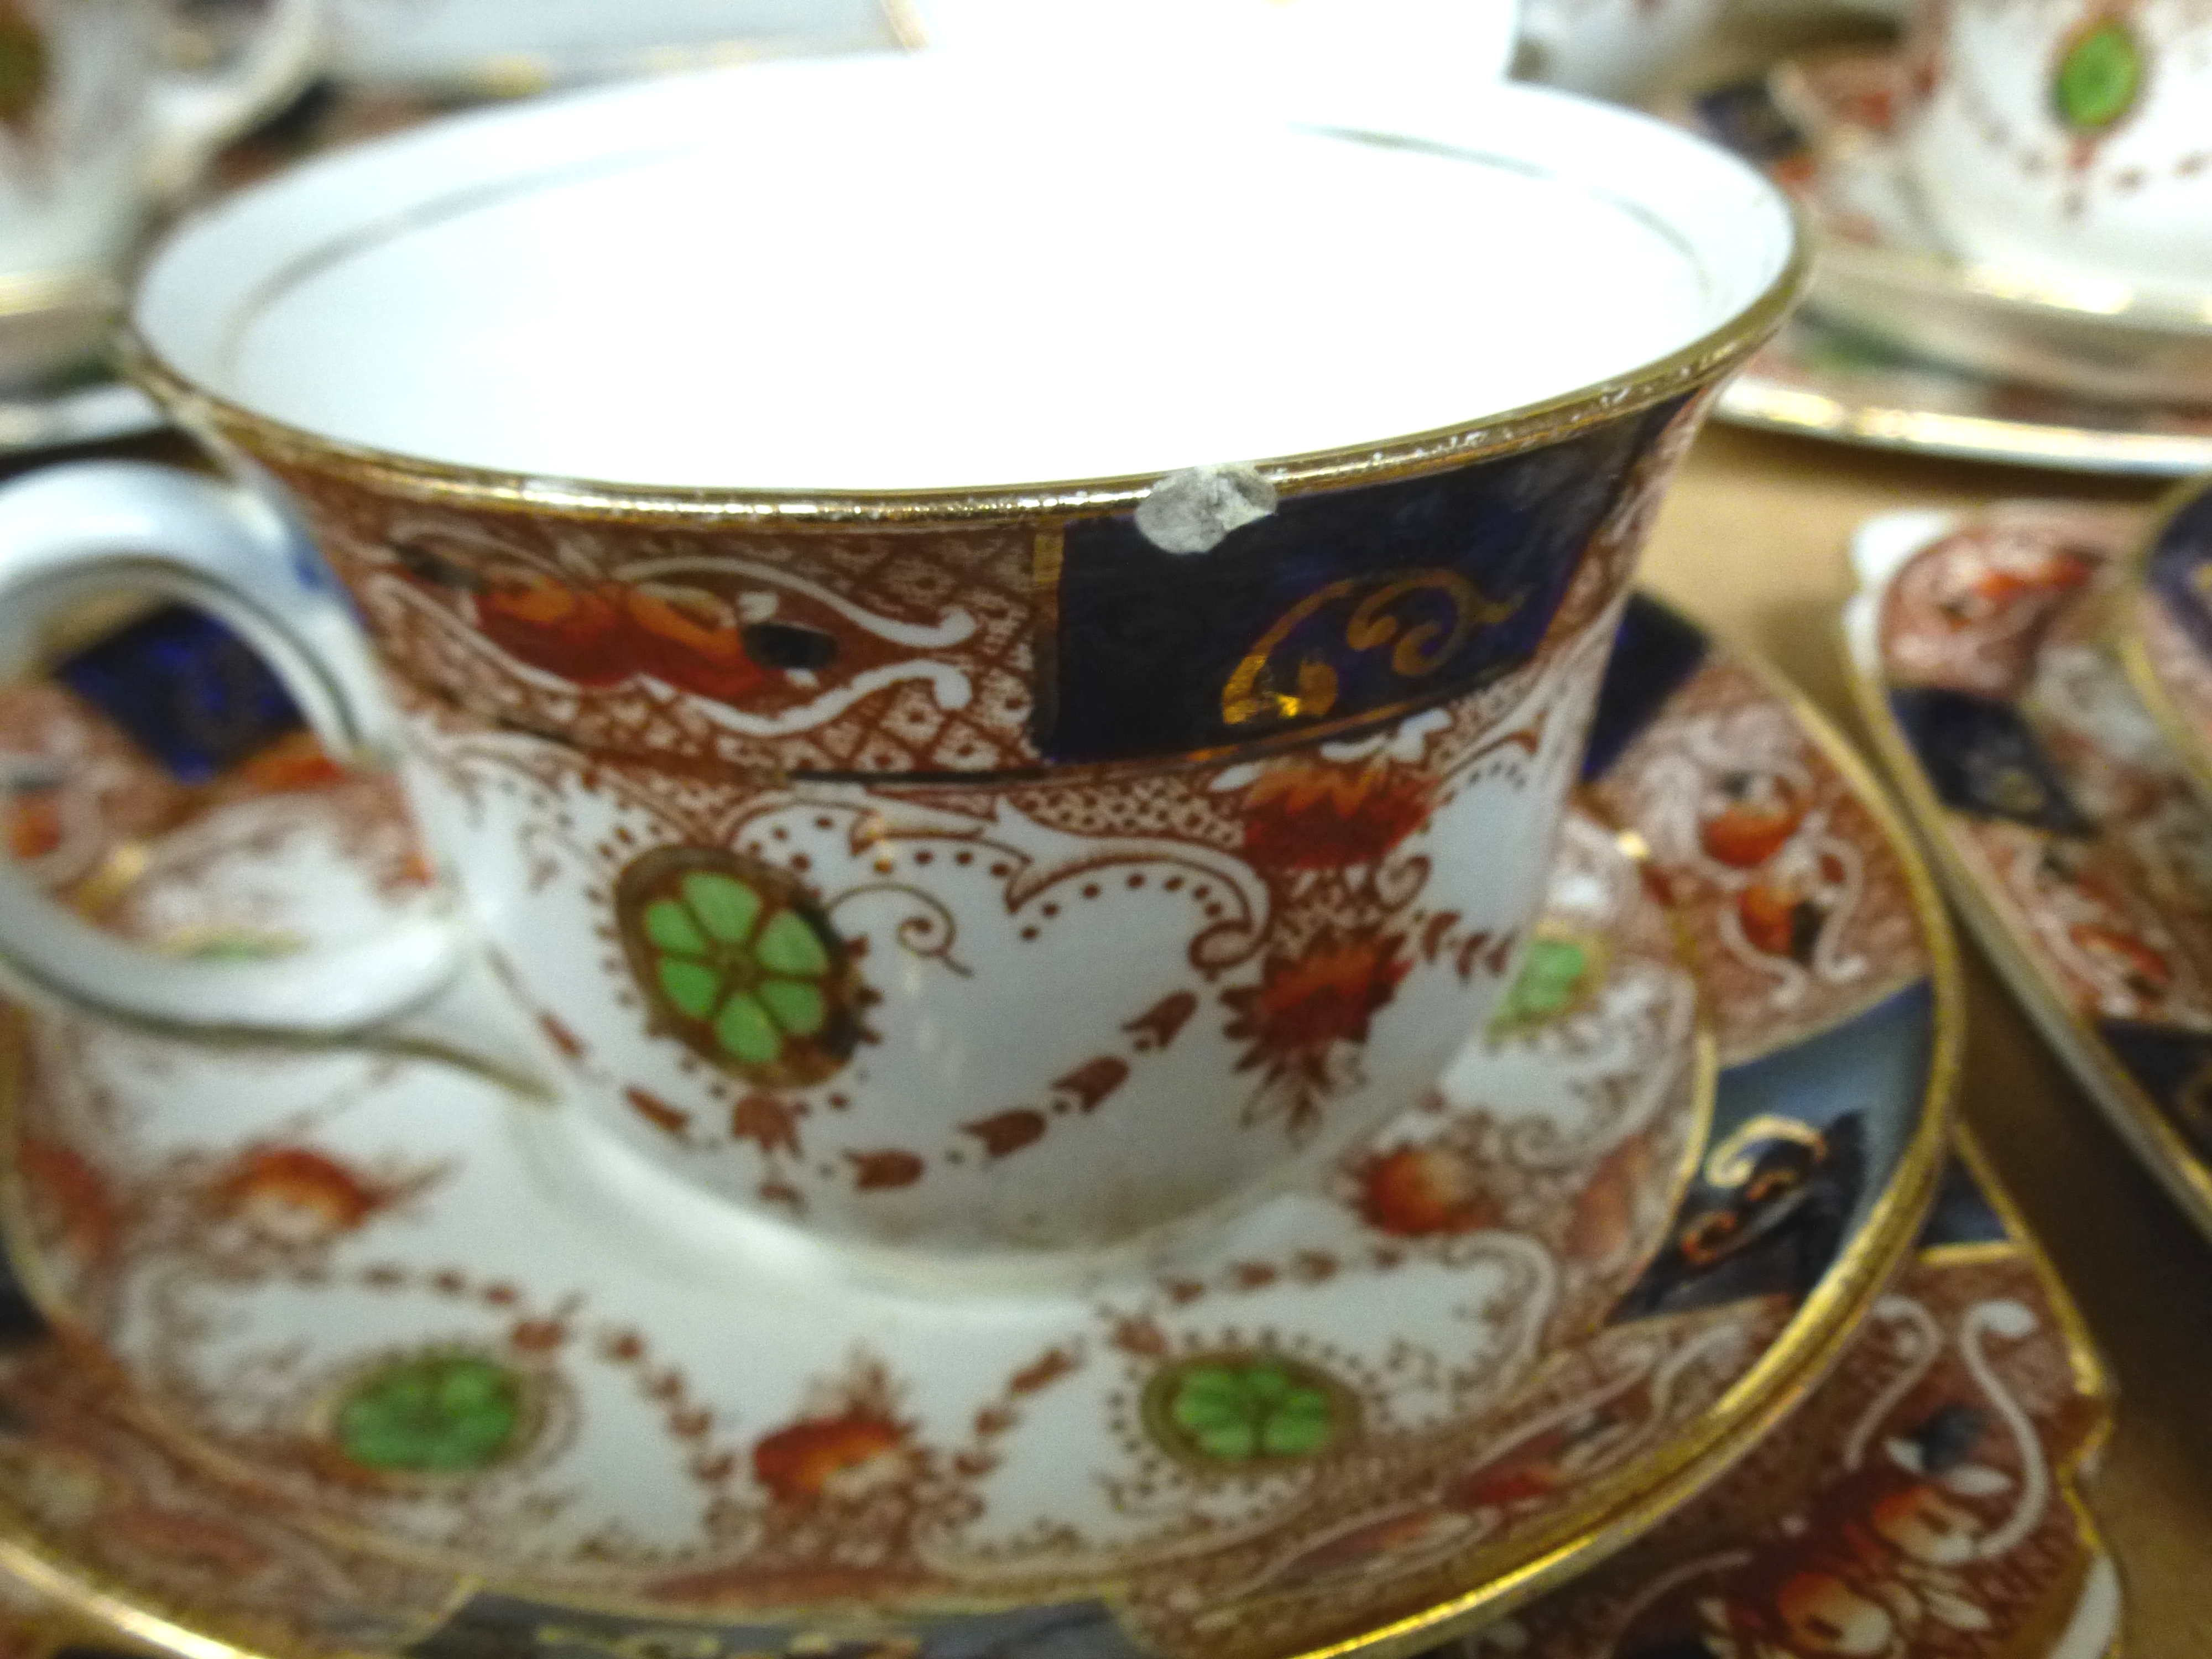 3 PART TEASETS INCLUDING DELPHINE AND CARLISLE WARE - Image 10 of 10